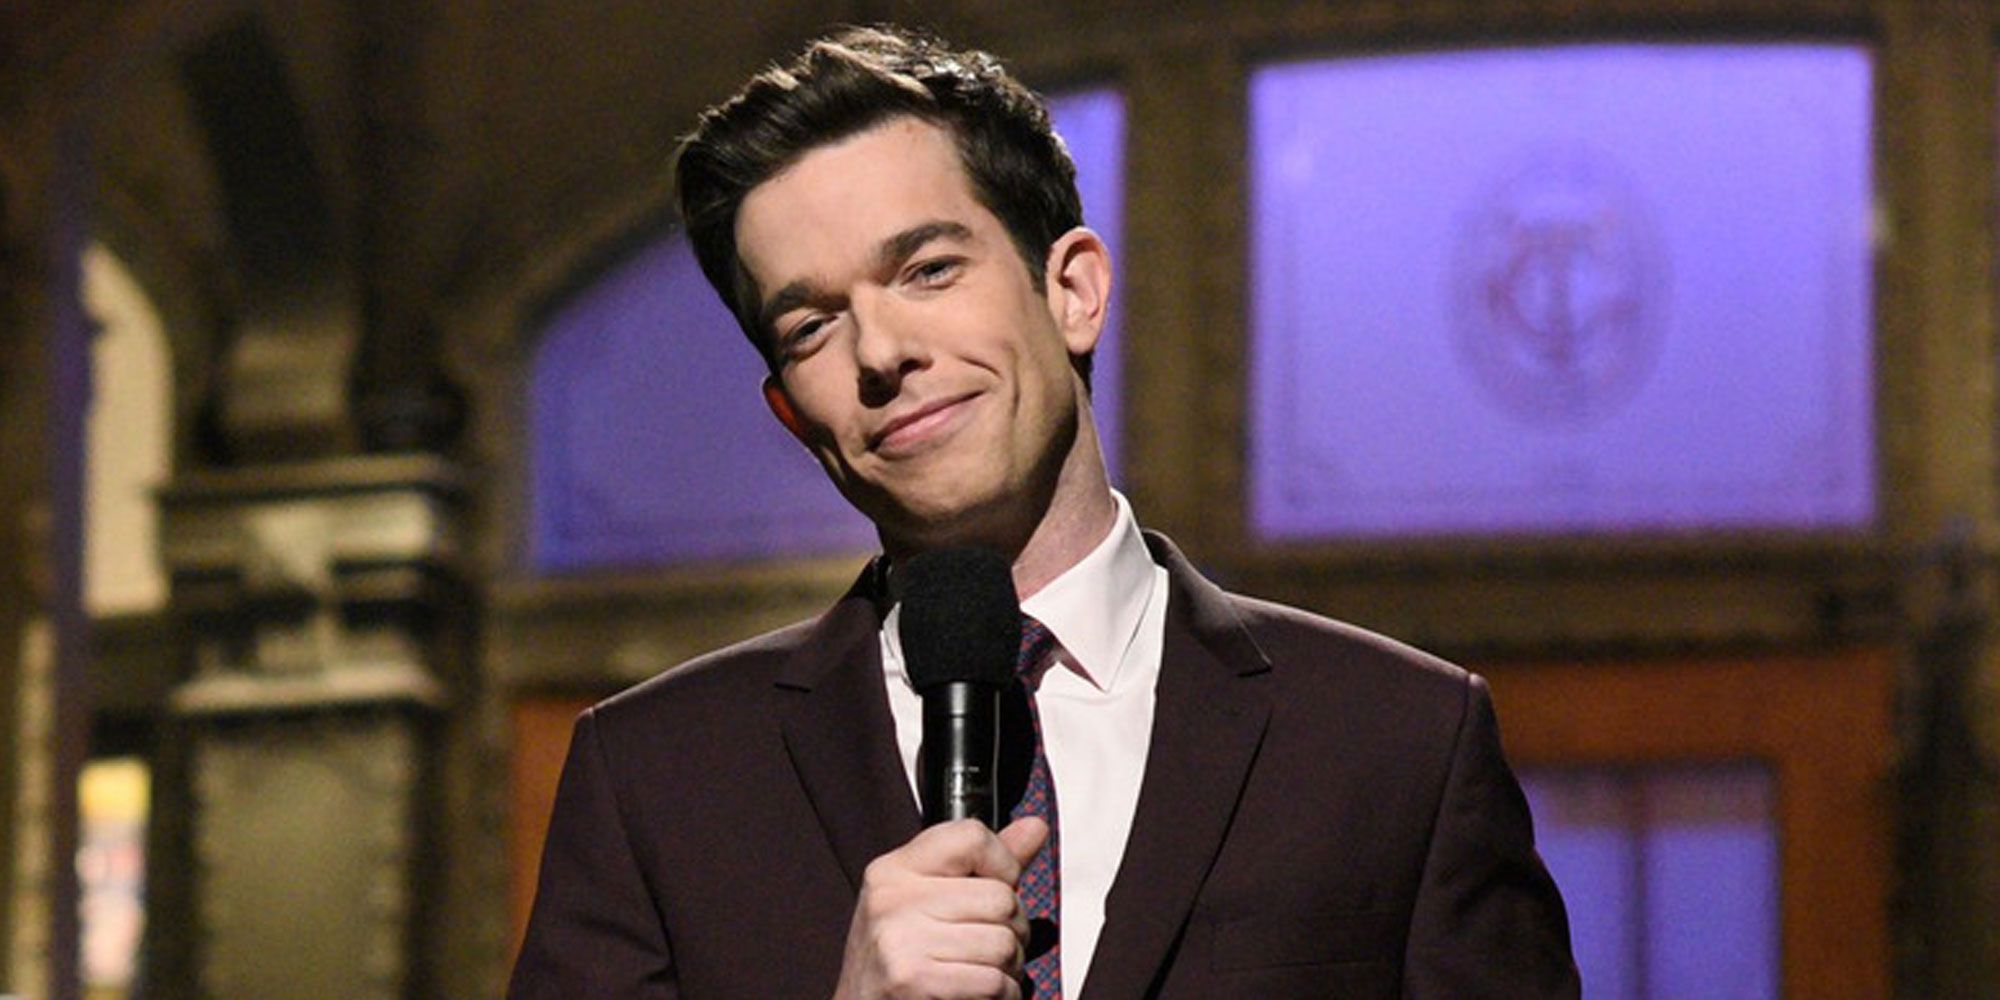 John Mulaney on stage with a microphone